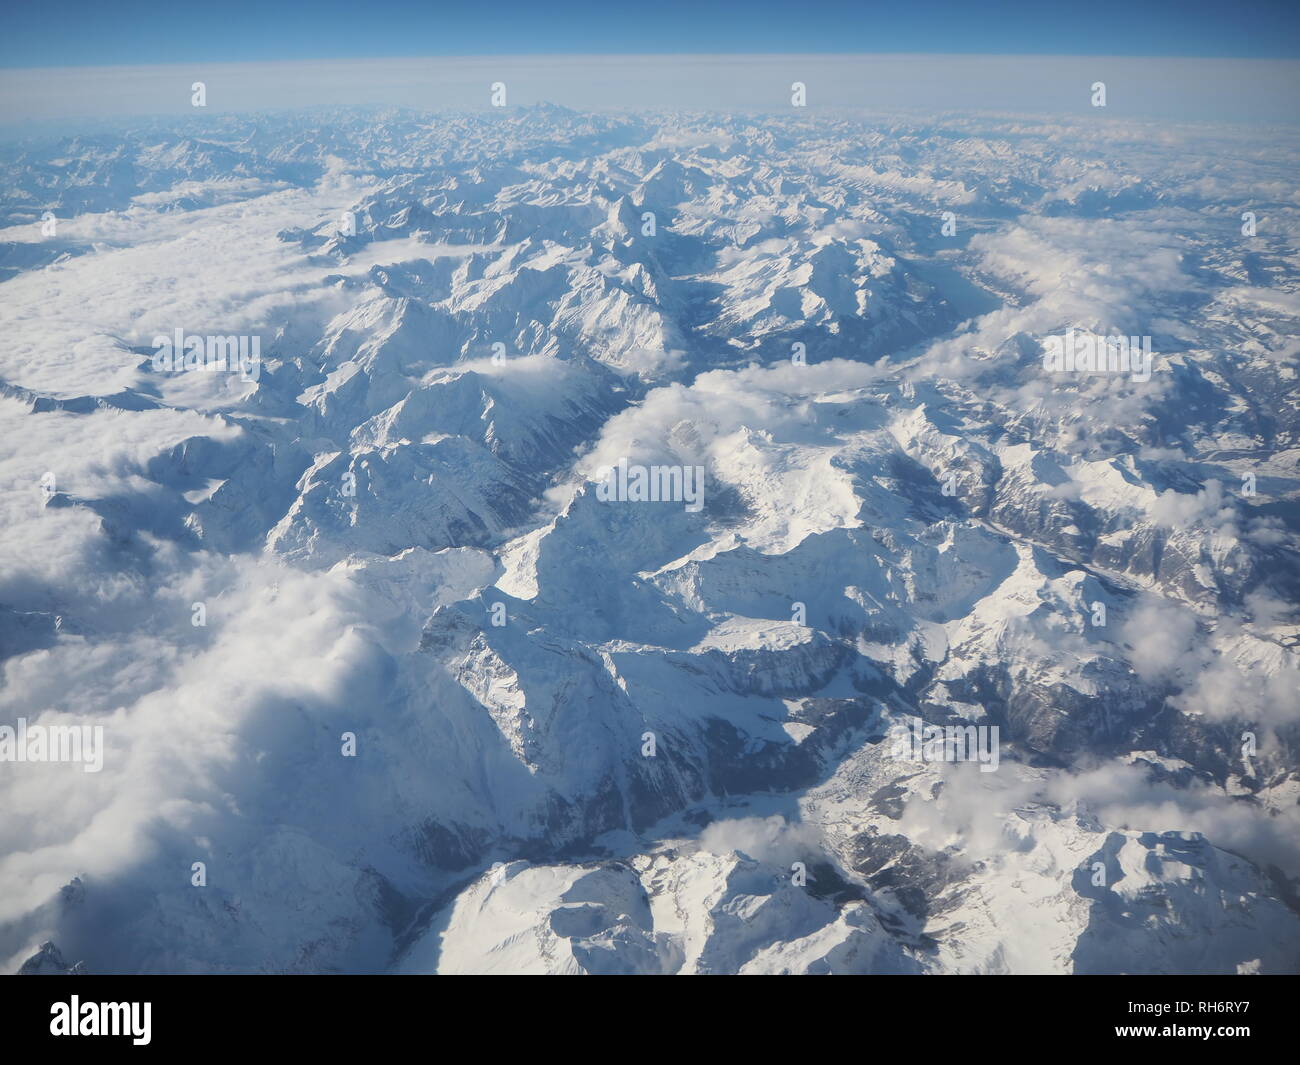 Aerial landscape of the Alps in Europe during winter season with fresh snow. View from the window of the airplane Stock Photo